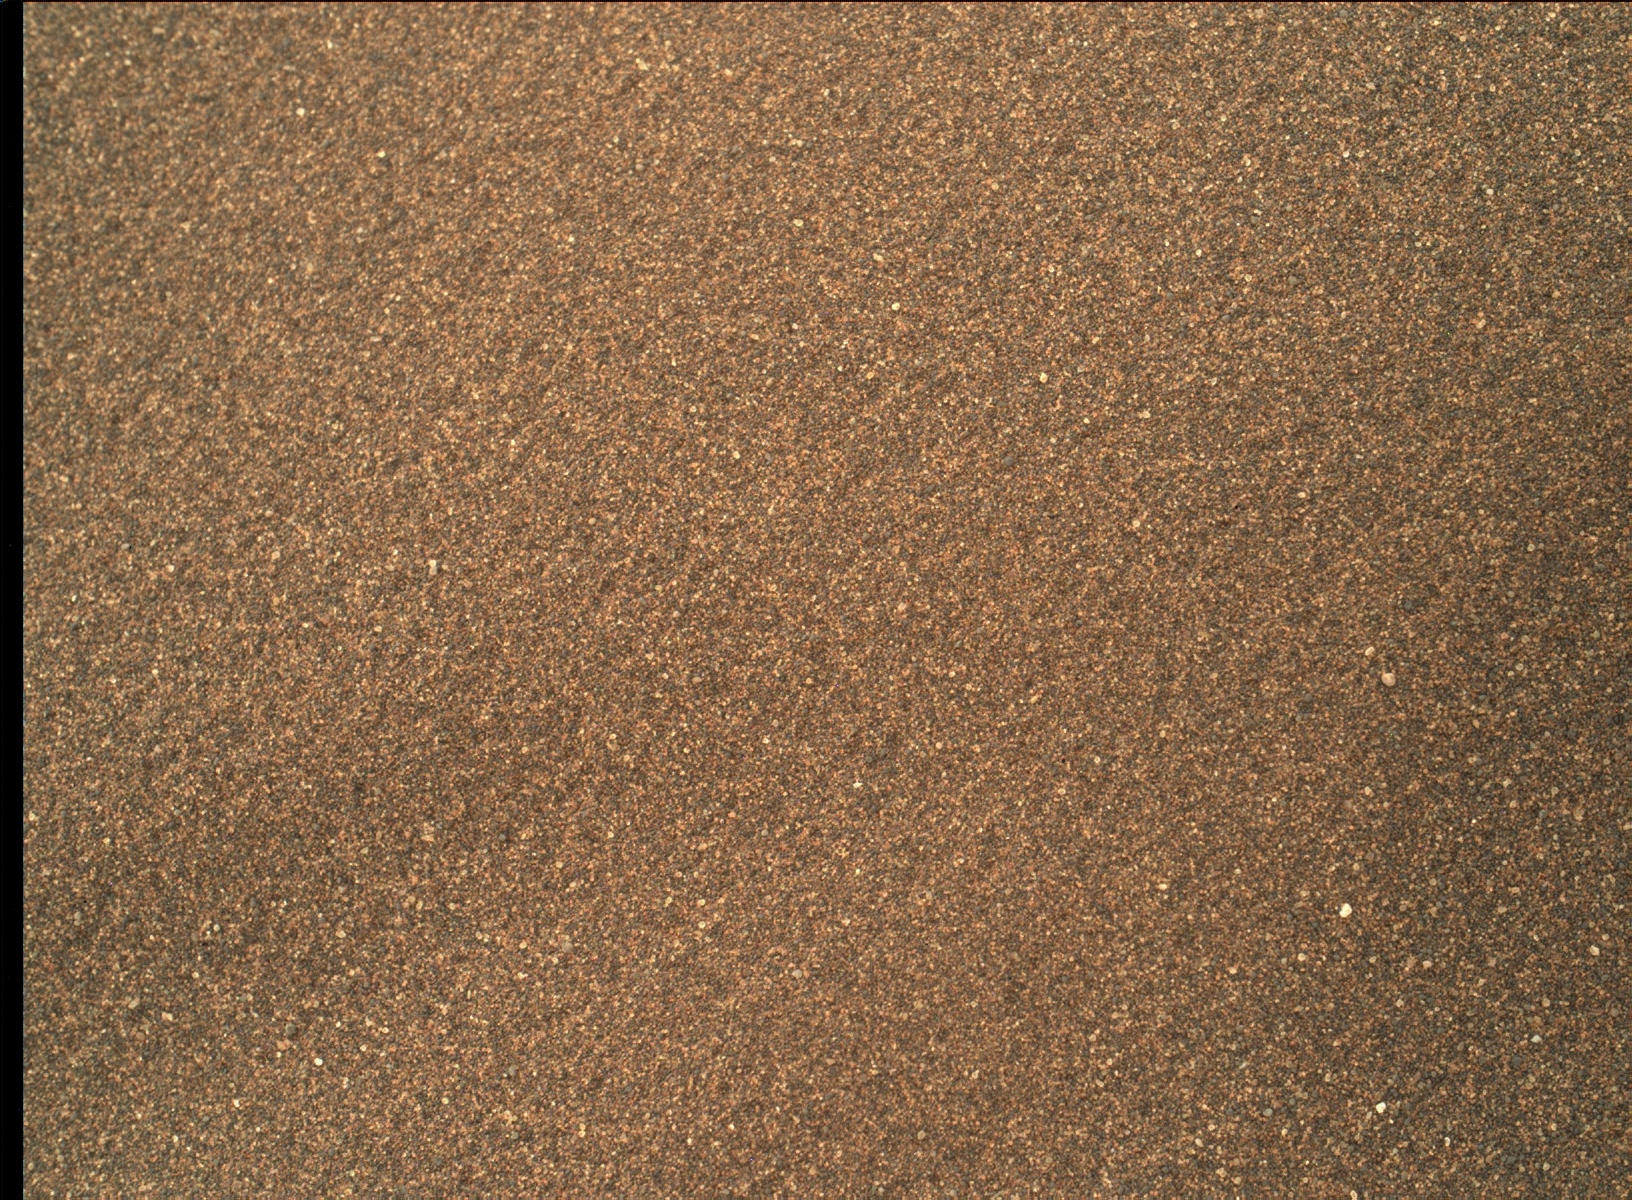 Nasa's Mars rover Curiosity acquired this image using its Mars Hand Lens Imager (MAHLI) on Sol 1659